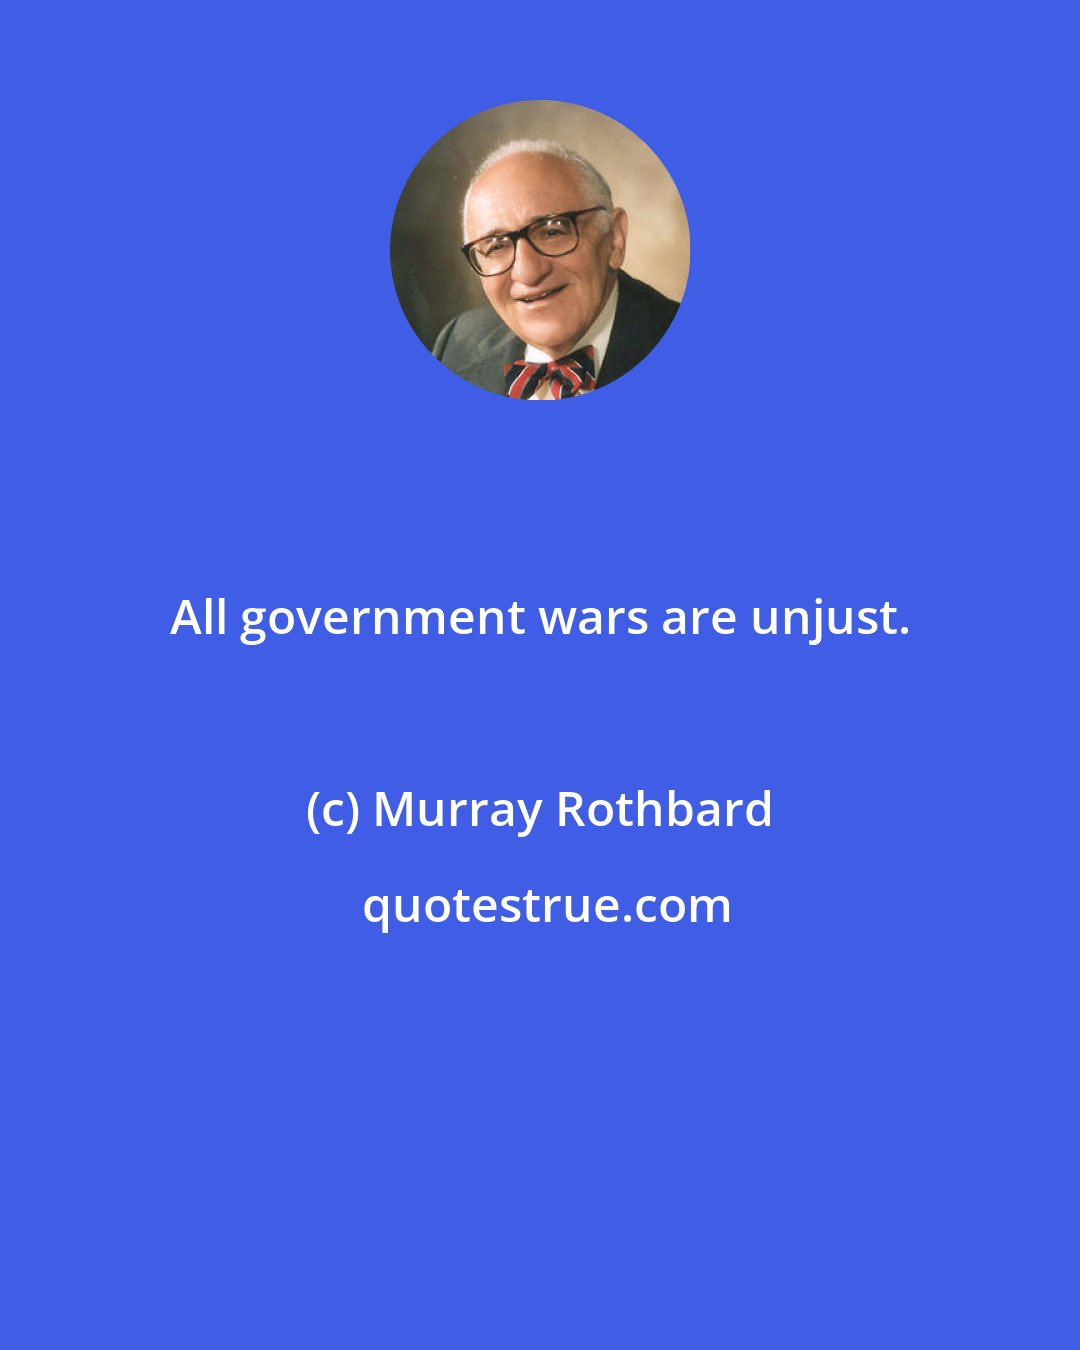 Murray Rothbard: All government wars are unjust.